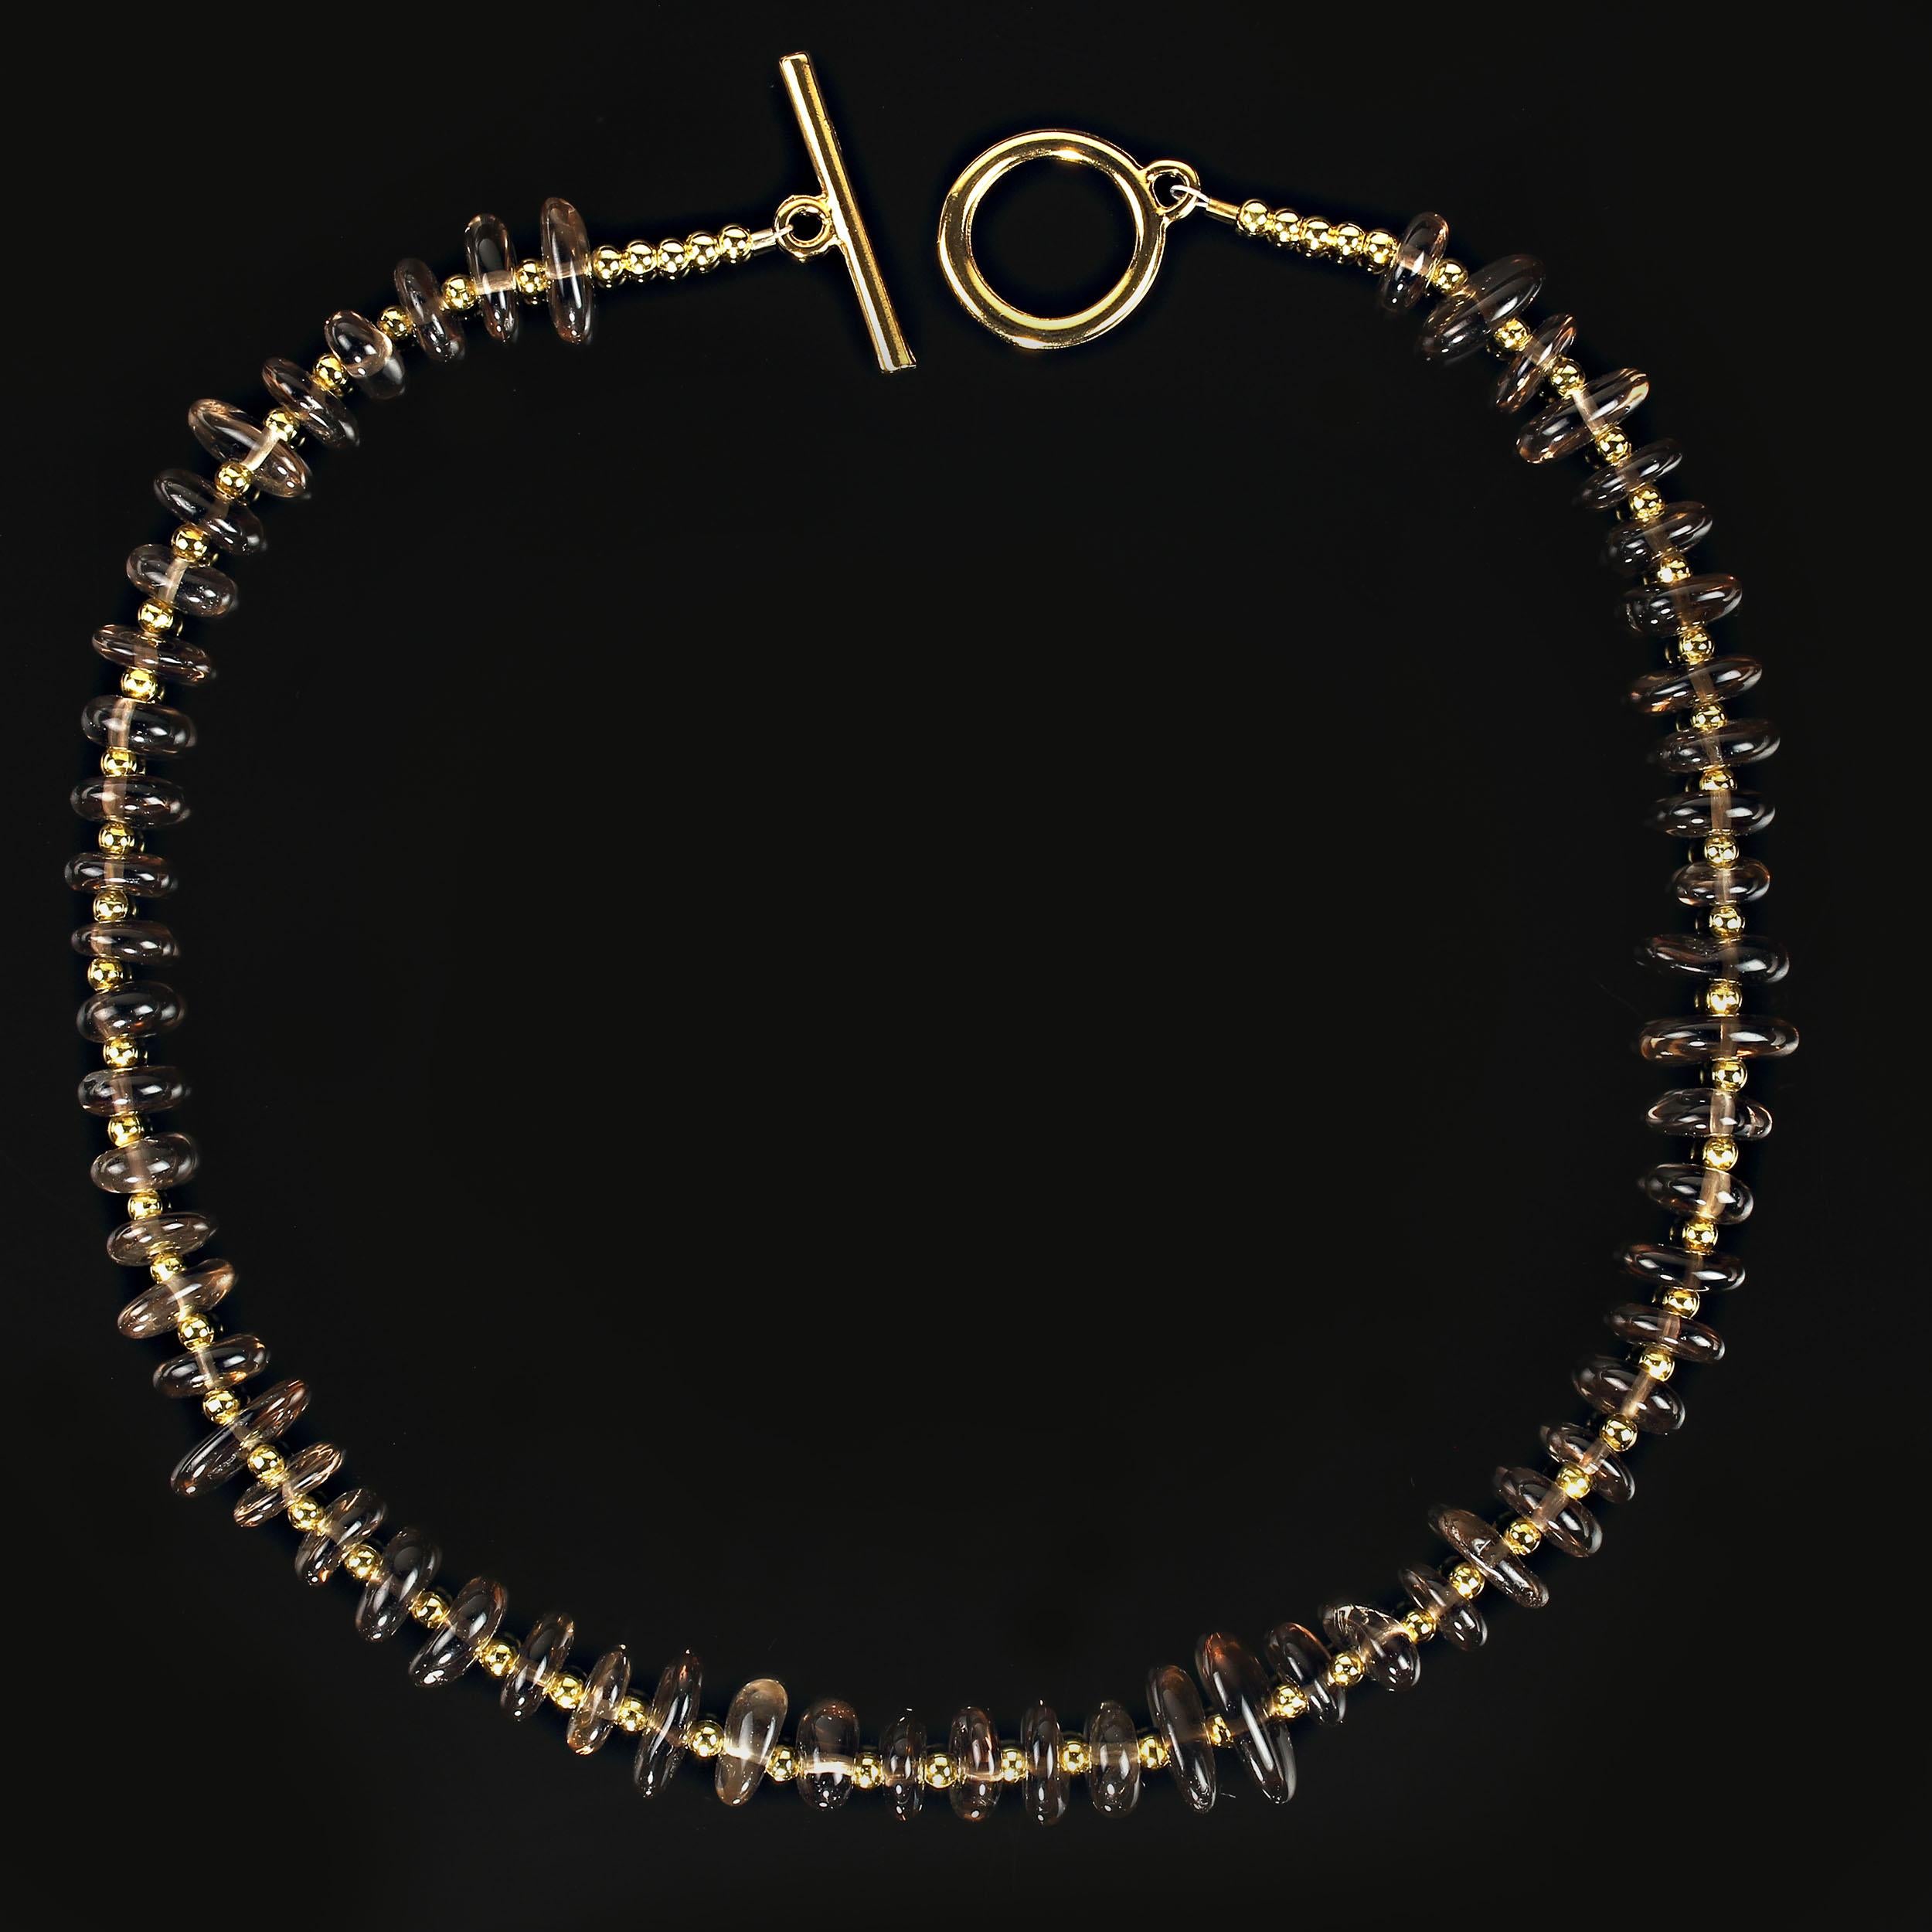 Bead AJD 16 Inch Smoky Quartz Necklace with Goldy Accents